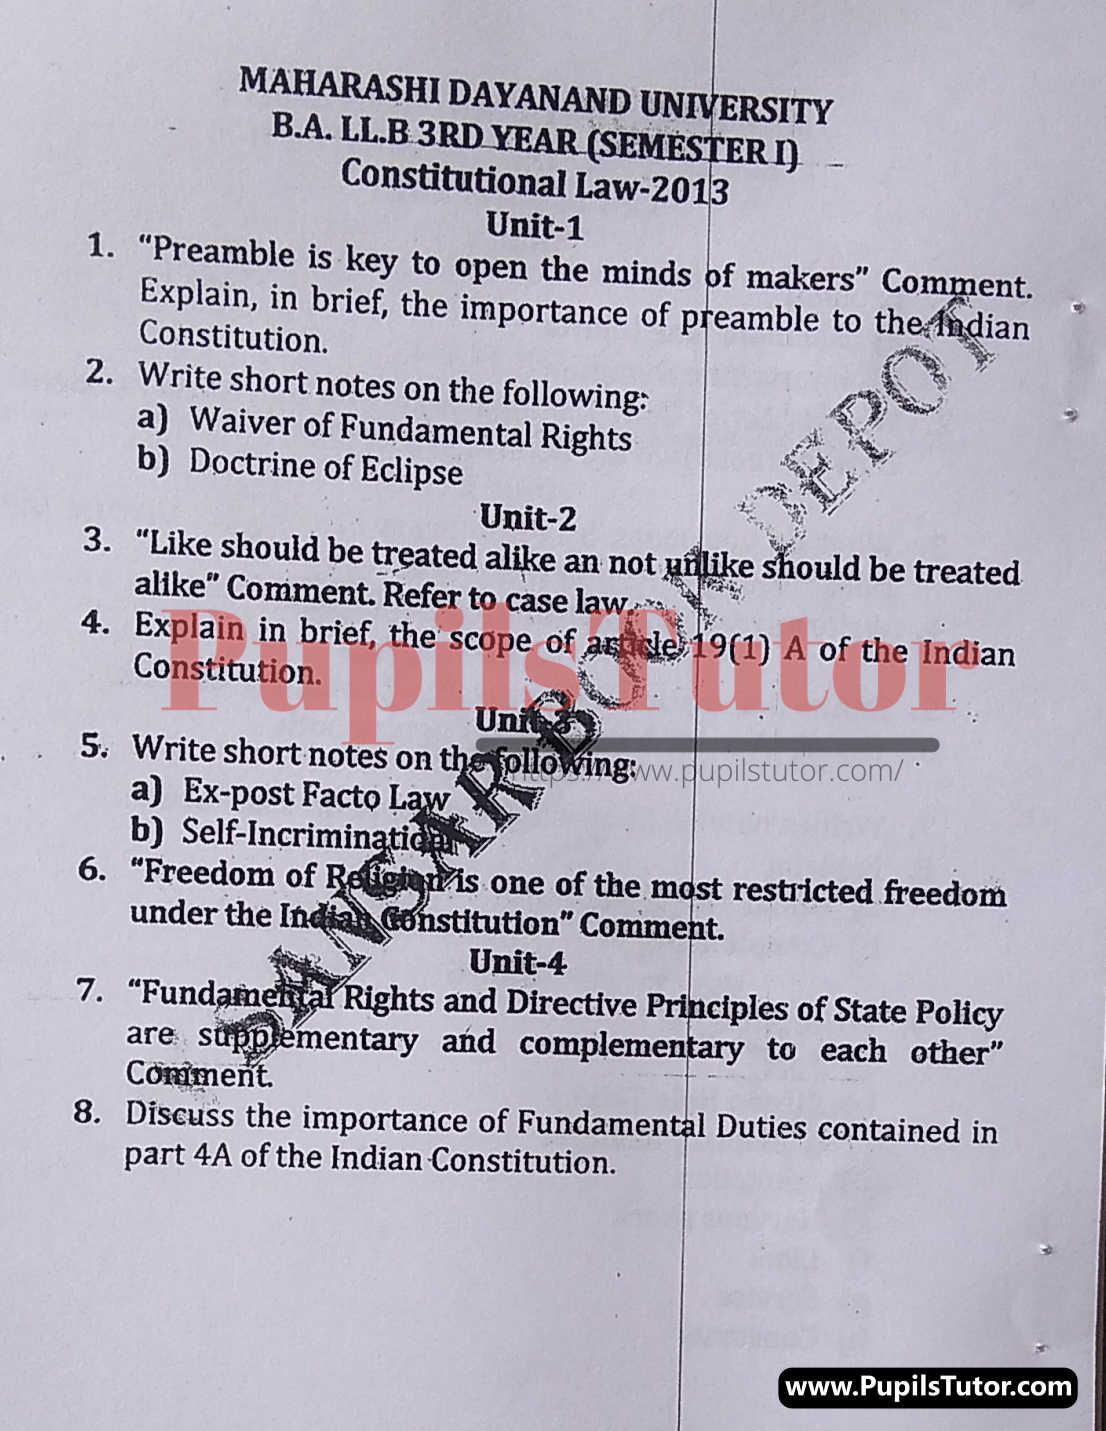 MDU (Maharshi Dayanand University, Rohtak Haryana) LLB Regular Exam (Hons.) First Semester Previous Year Constitutional Law Question Paper For 2013 Exam (Question Paper Page 1) - pupilstutor.com